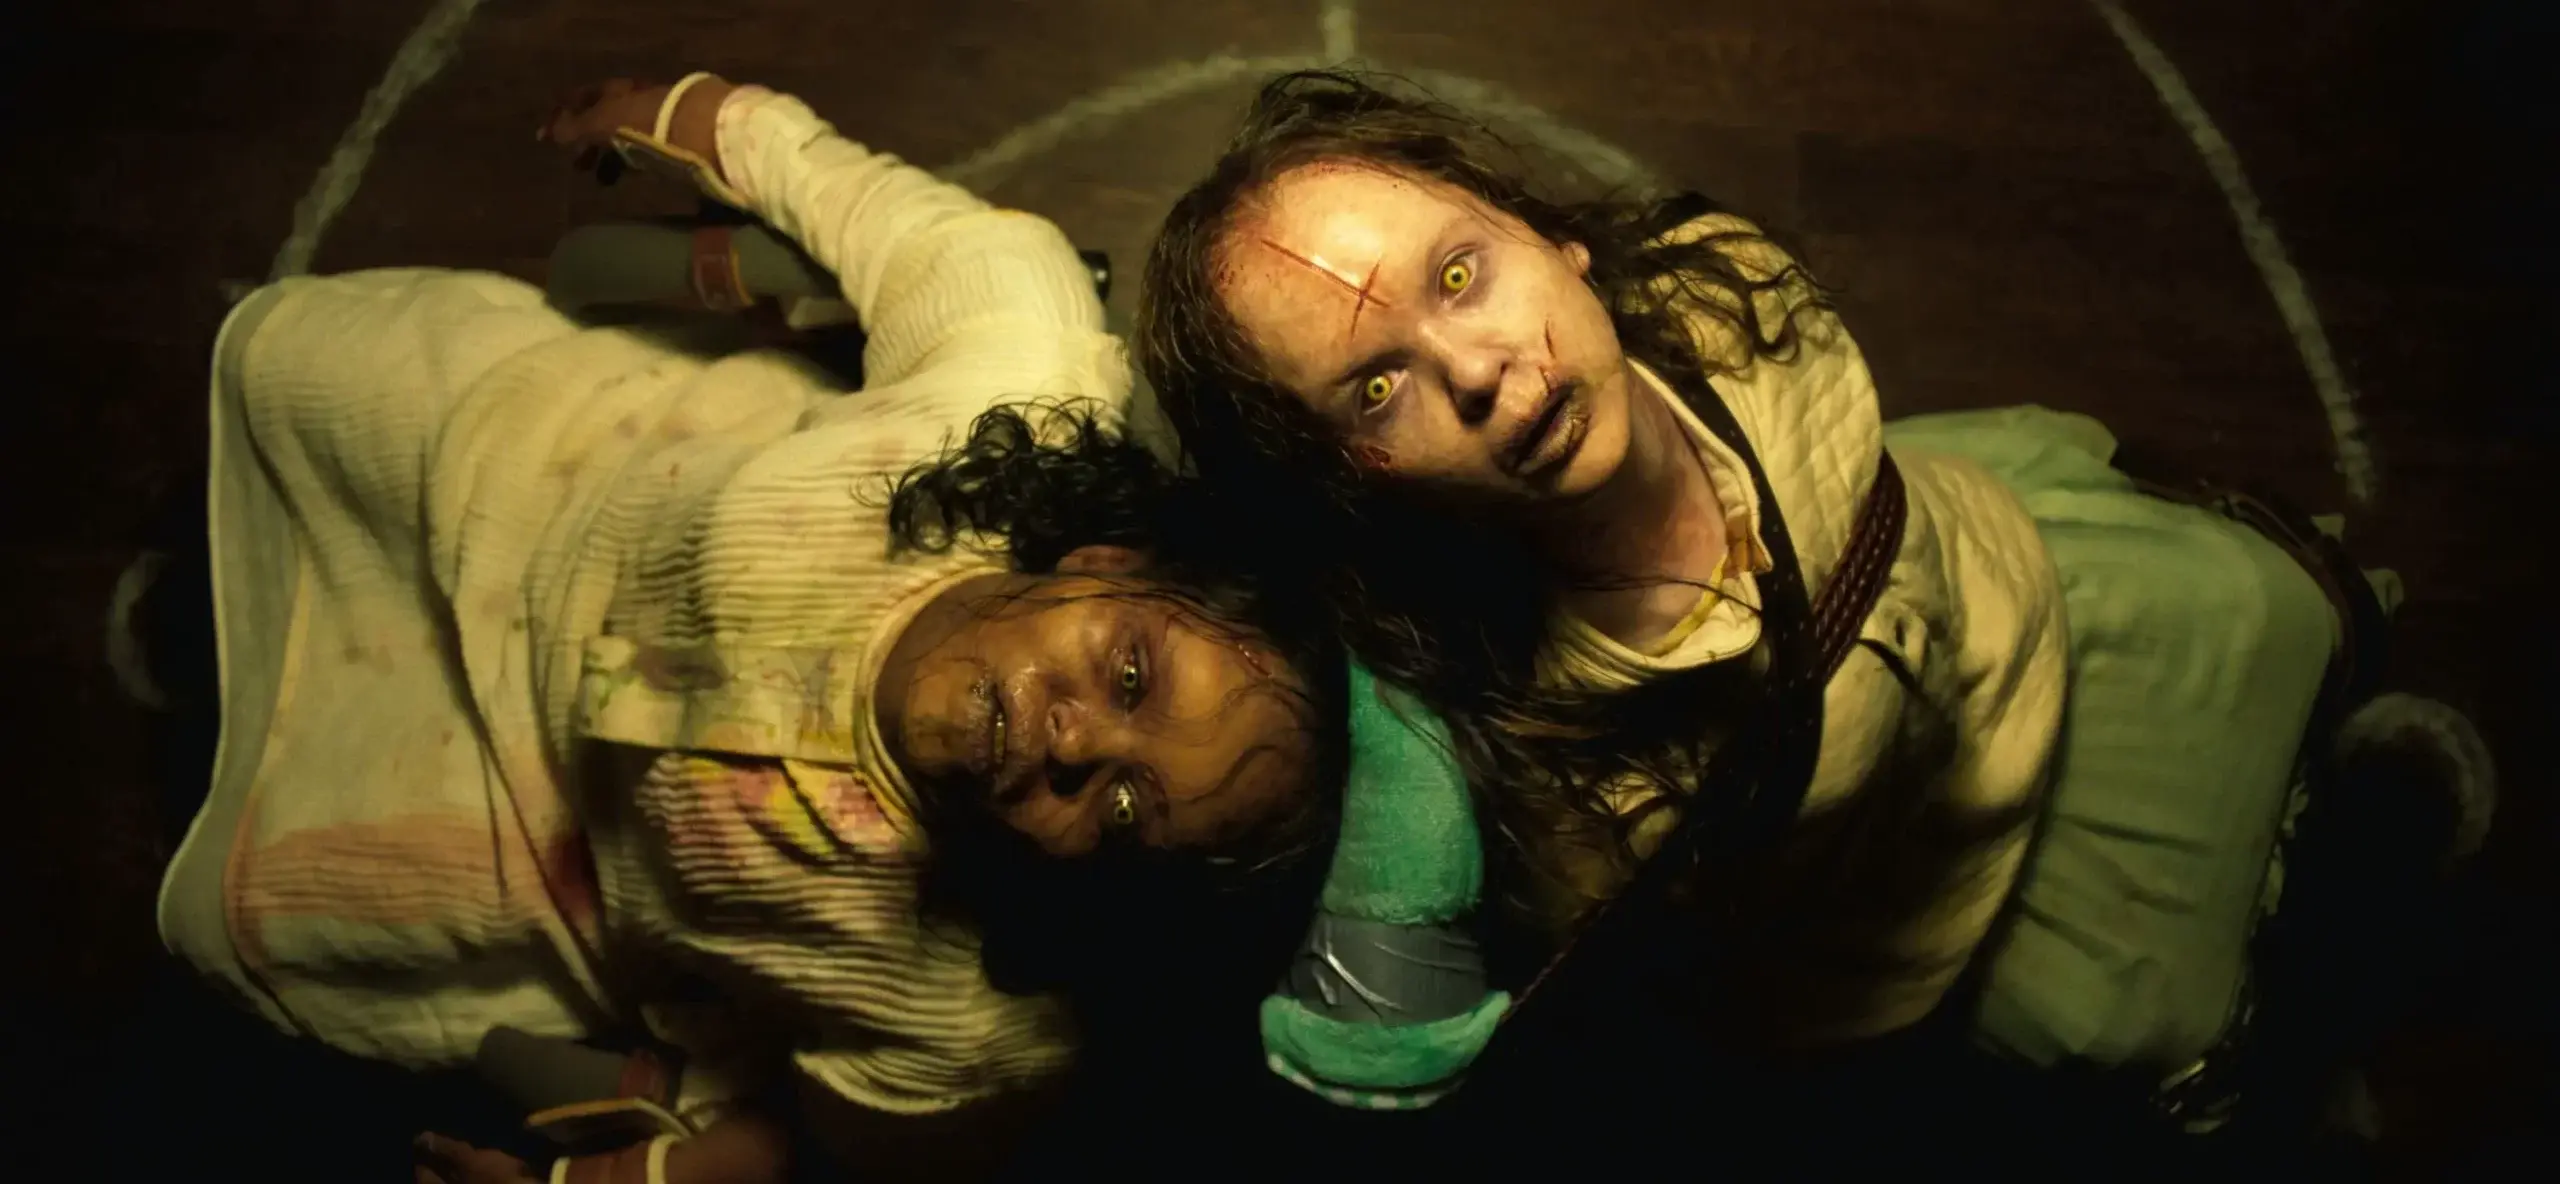 'Exorcist: Believer' Should Be Dragged To Hell, But There Is A Saving Grace